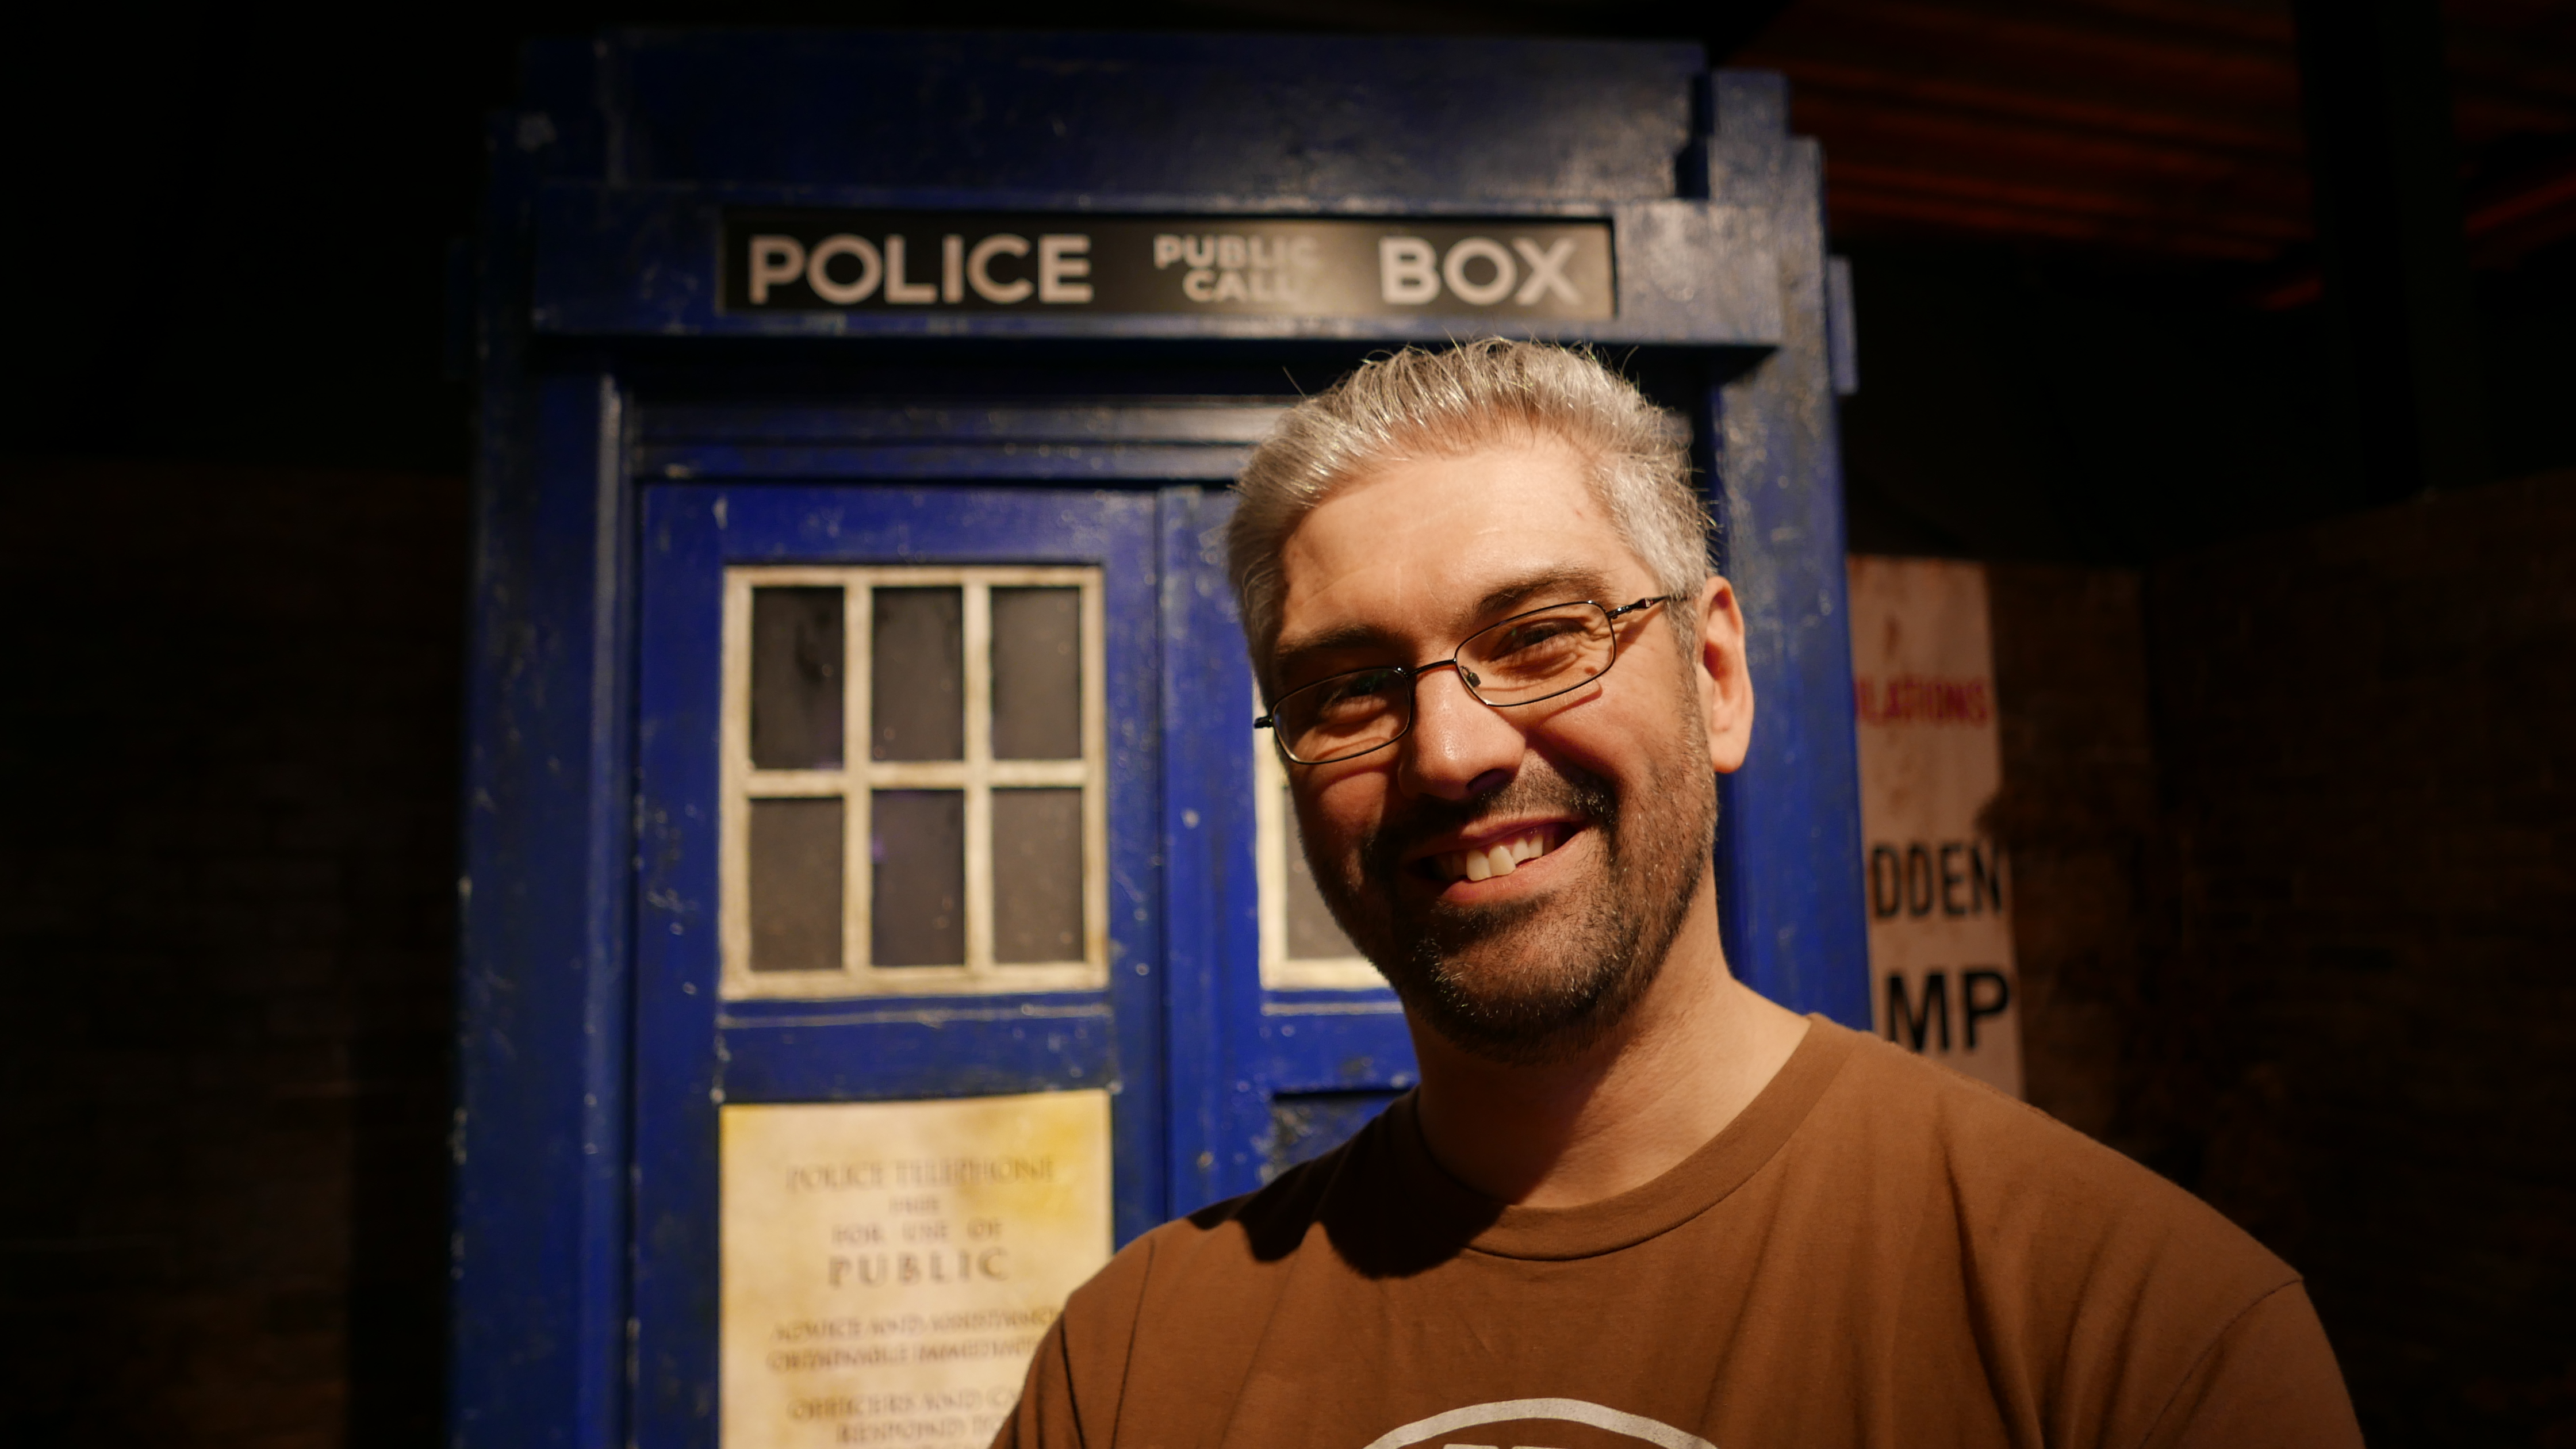 A smiling bearded man with glasses, Si Hart, is standing in front of the TARDIS